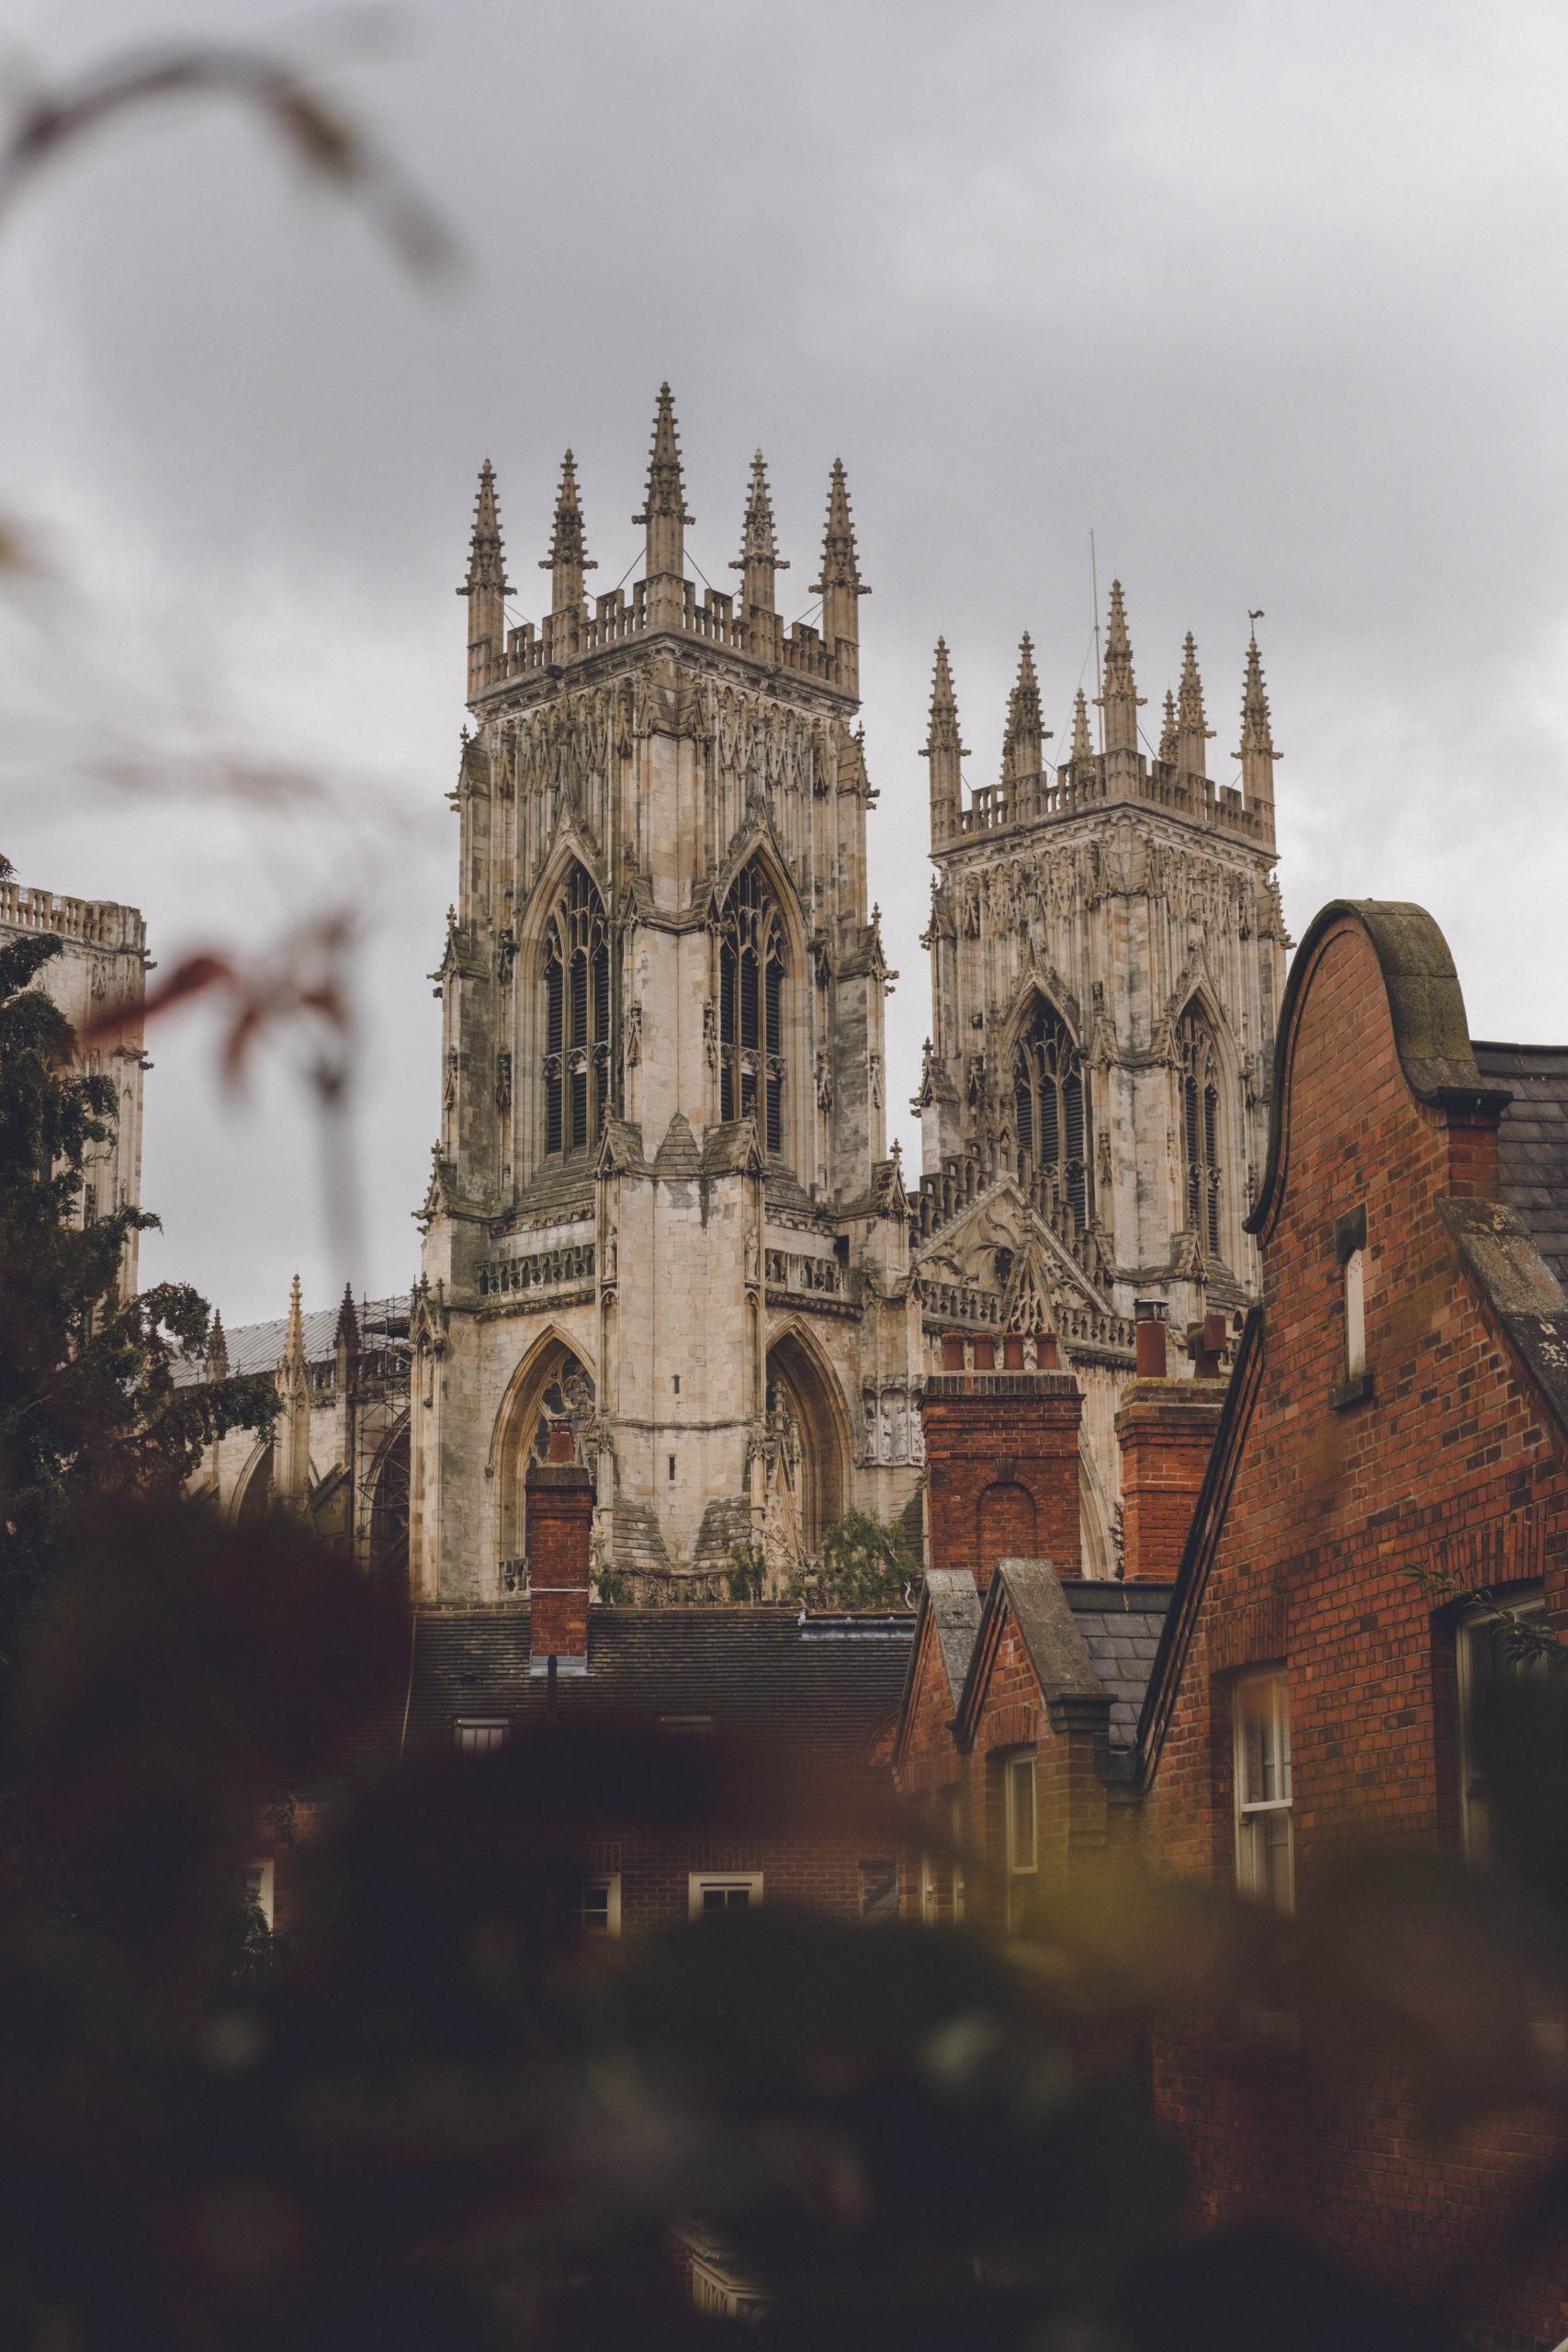 The York Minster as seen from the city walls